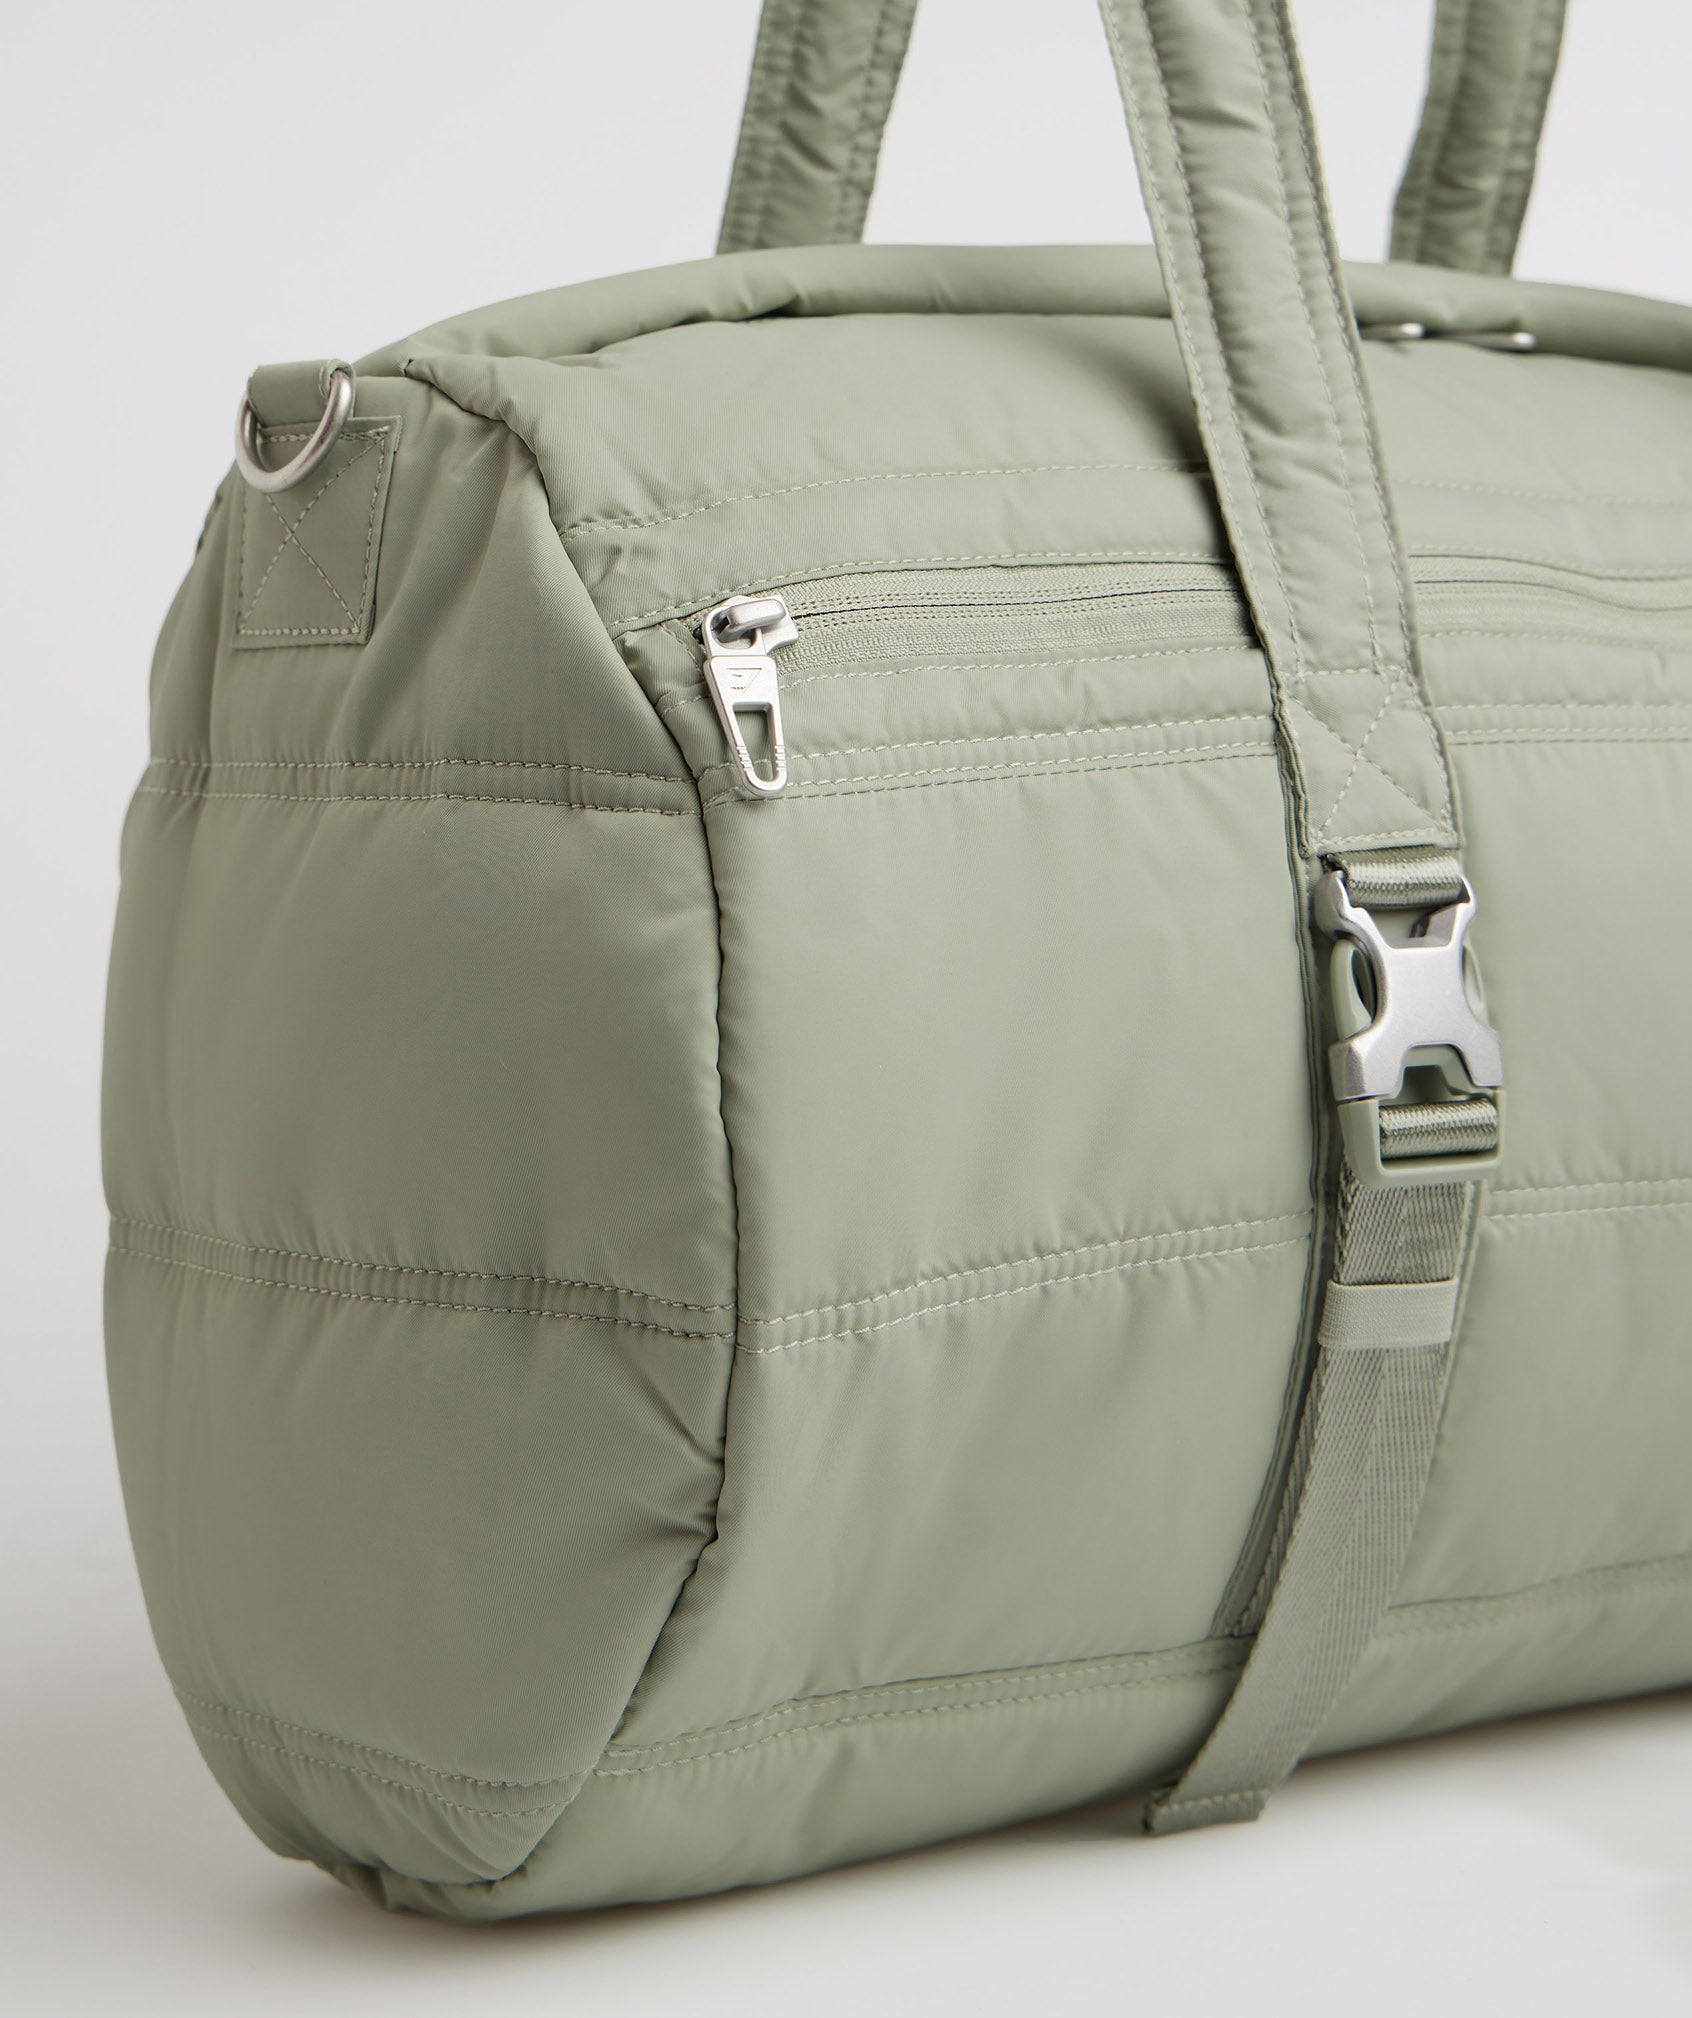 Premium Lifestyle Barrel Bag in Light Olive Green - view 2